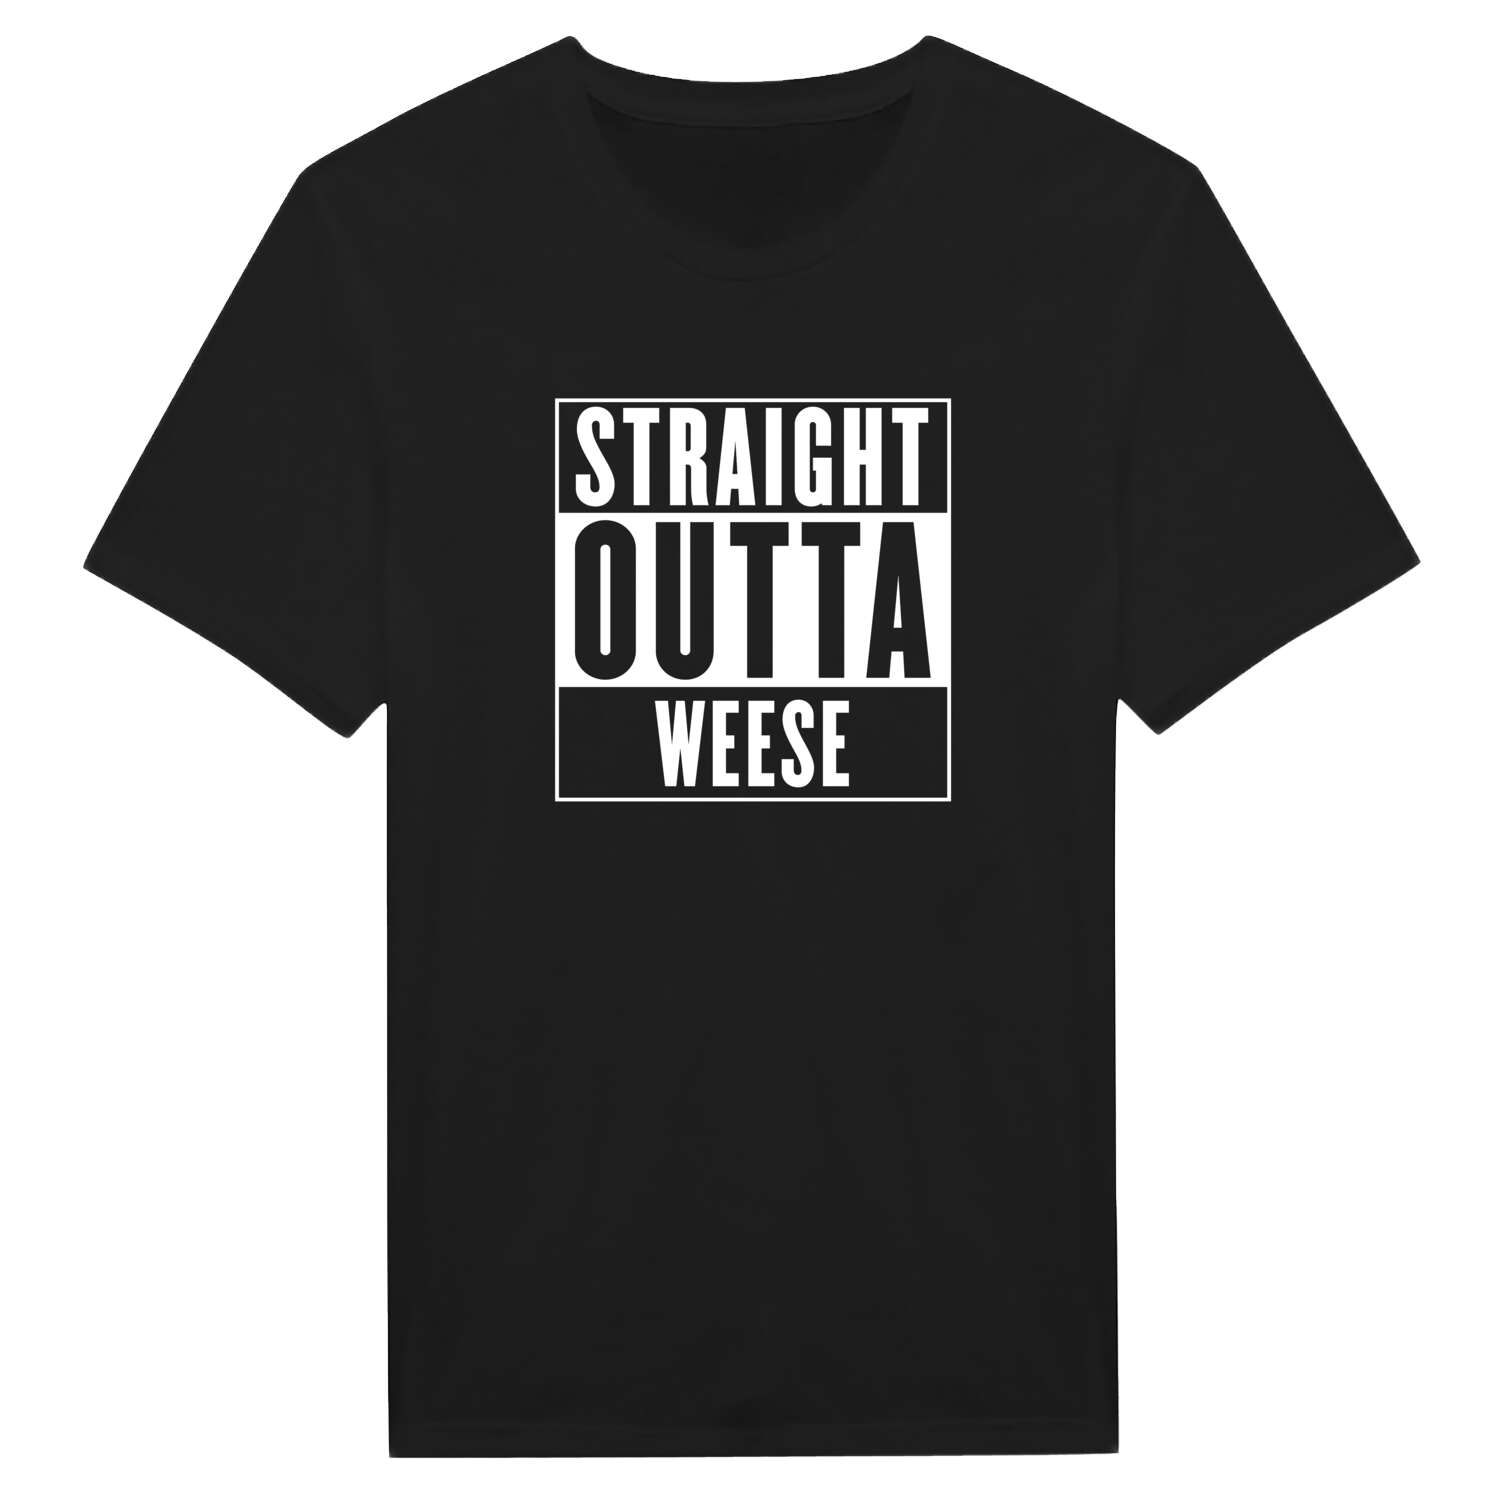 Weese T-Shirt »Straight Outta«